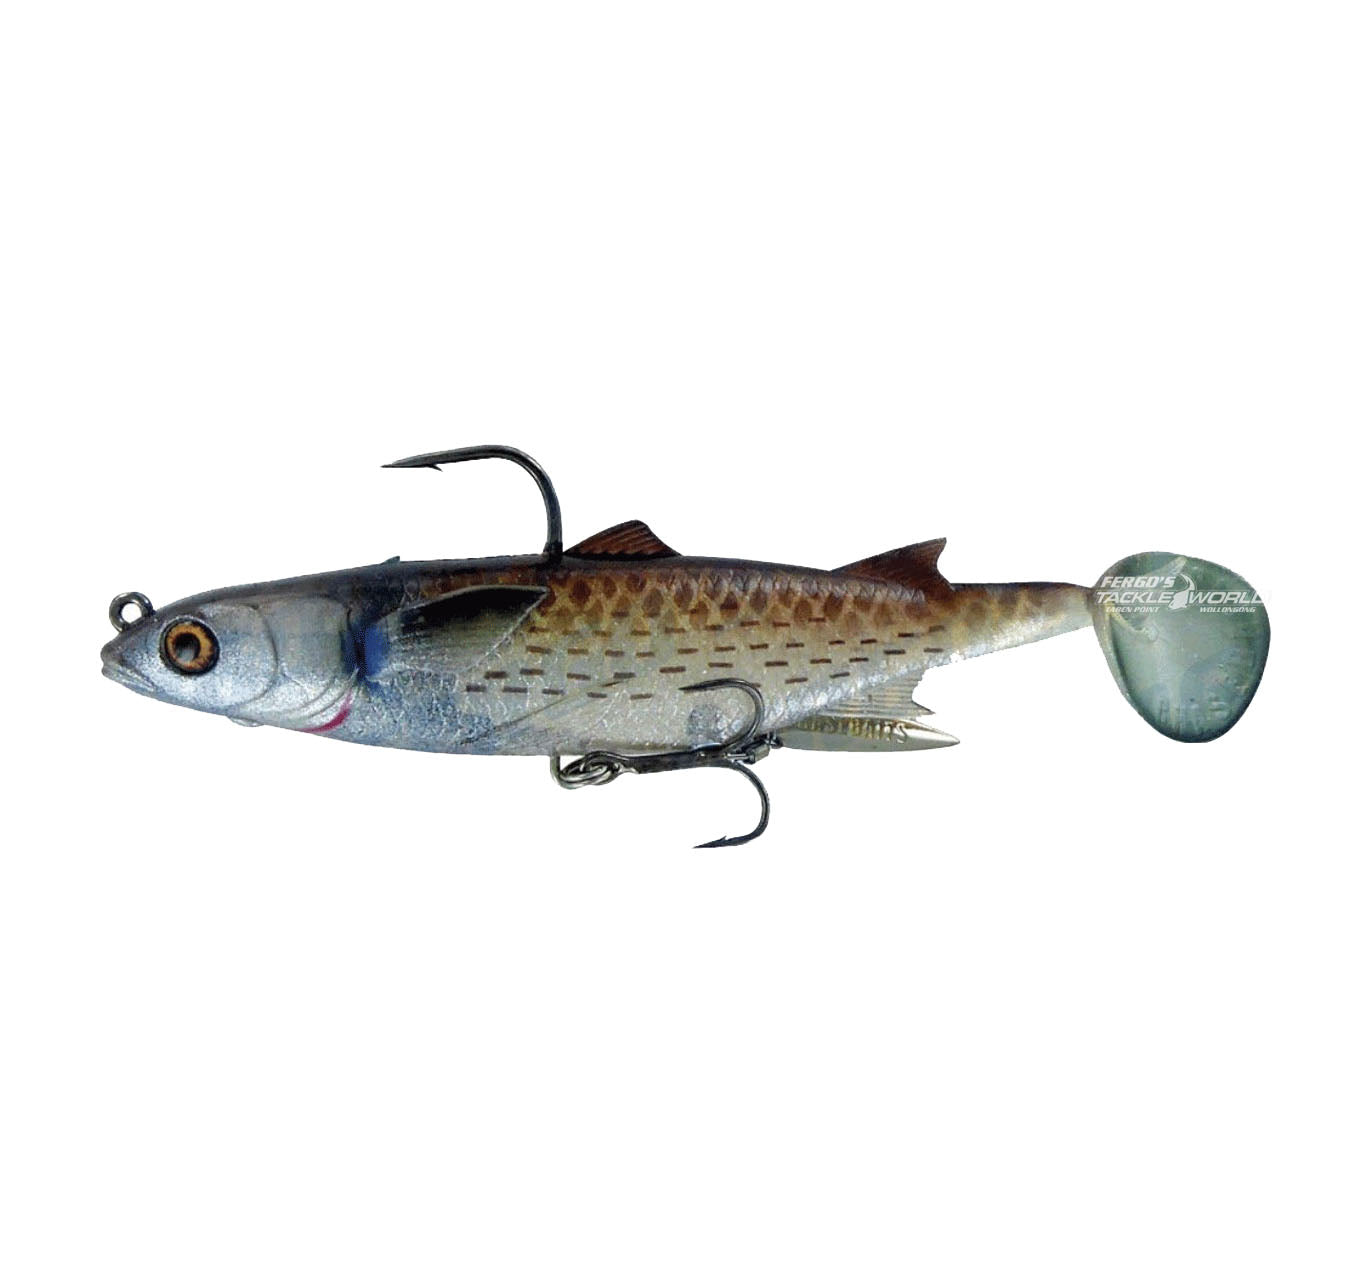 Chasebaits Poddy Mullet 125mm Lure Silver Mullet